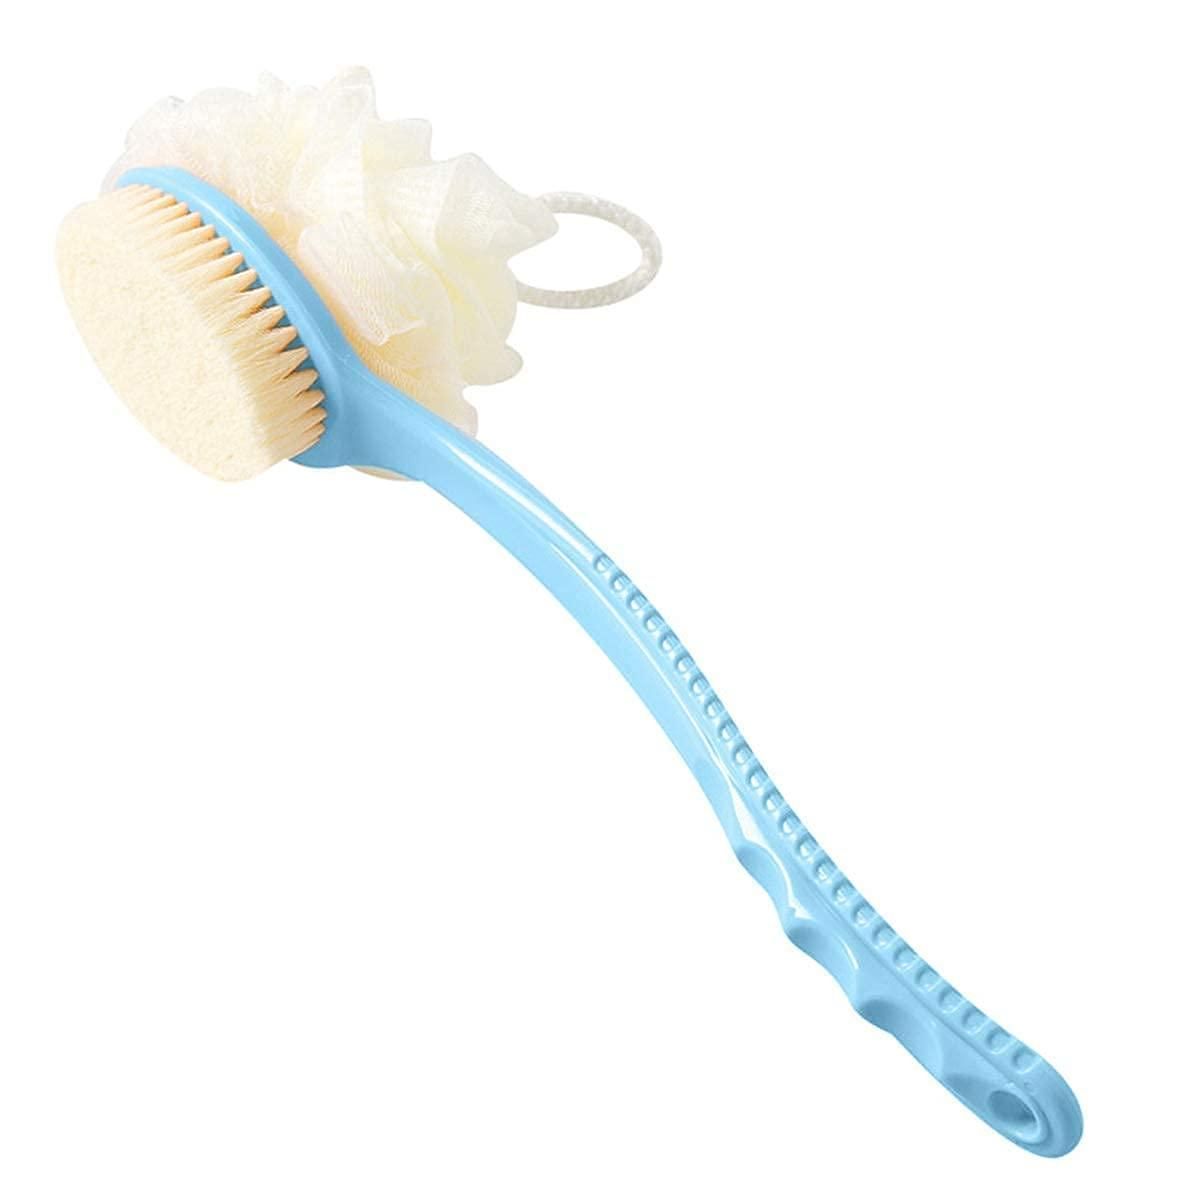 Arcreactor Zone 2 IN 1 loofah with handle, Bath Brush, back scrubber(Pack of 2)